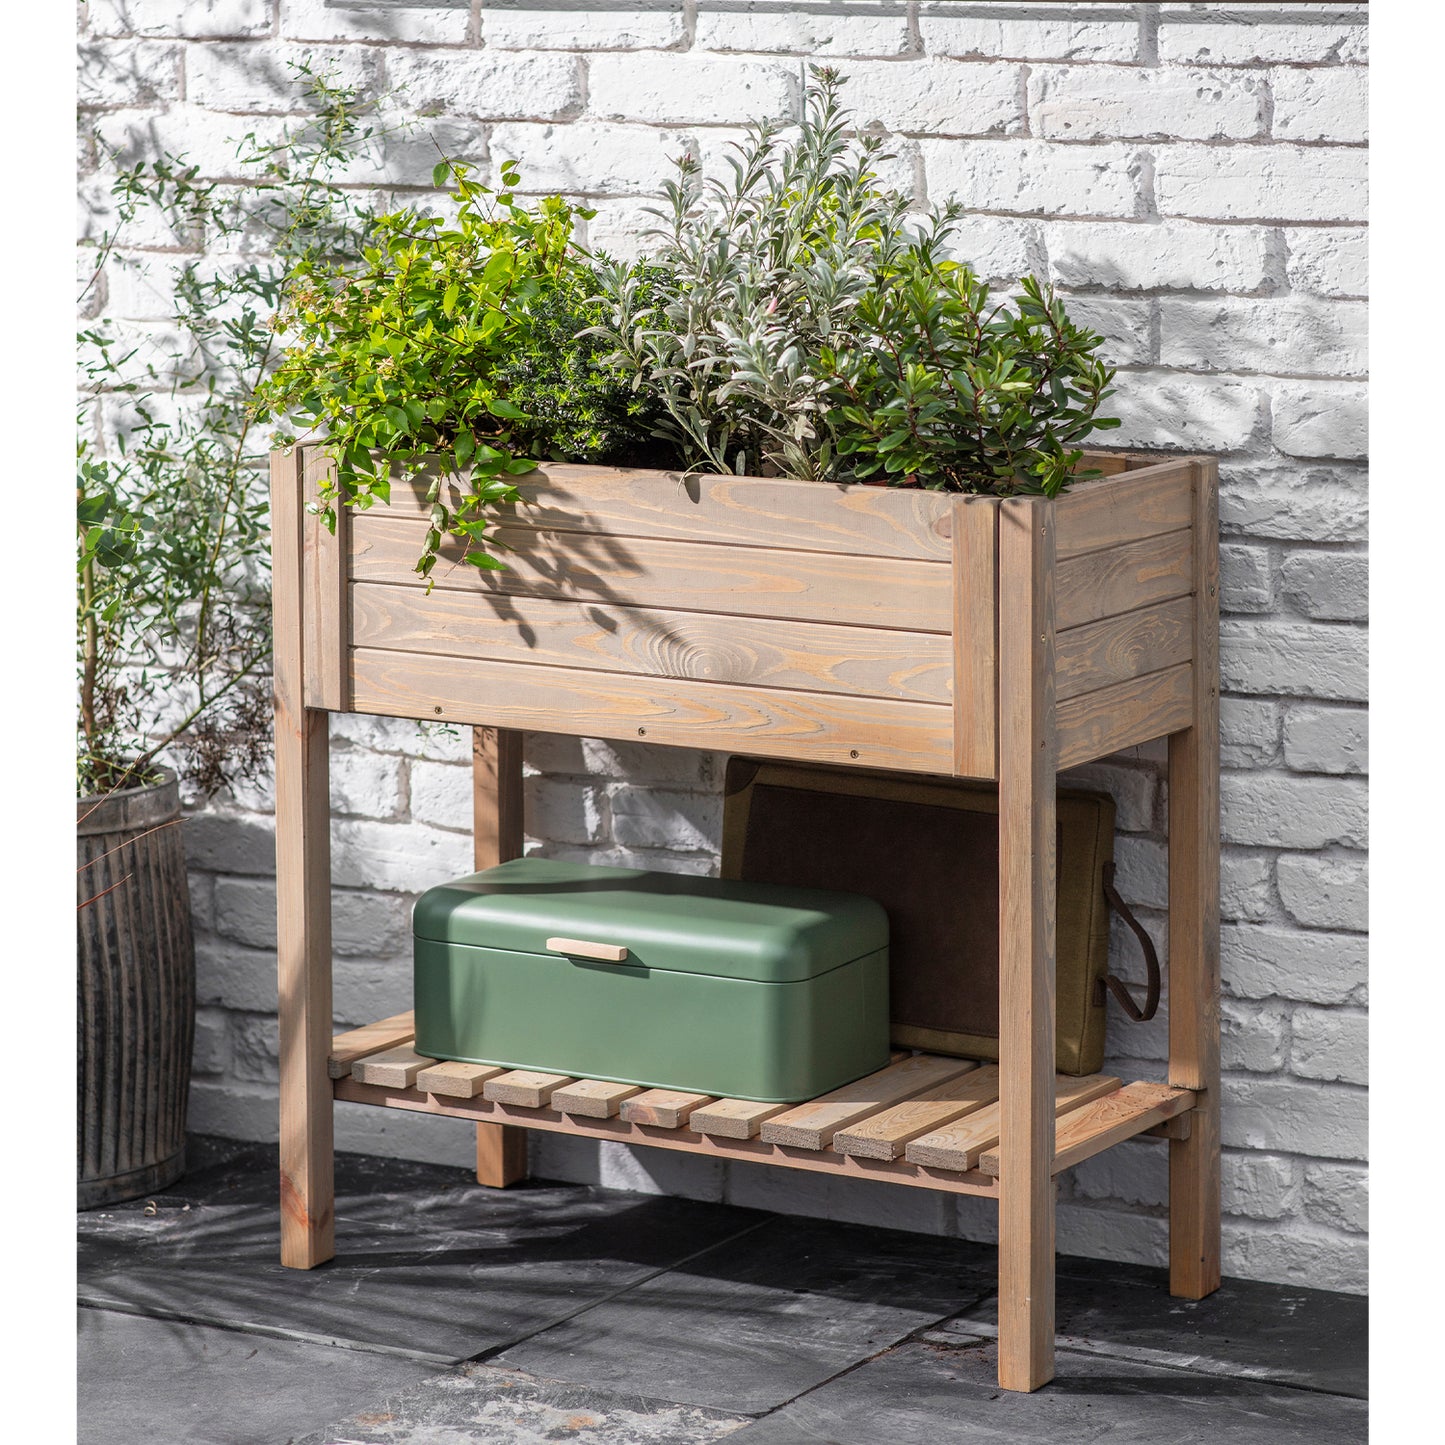 Foxmore Raised Planter 39cm Pine by Garden Trading